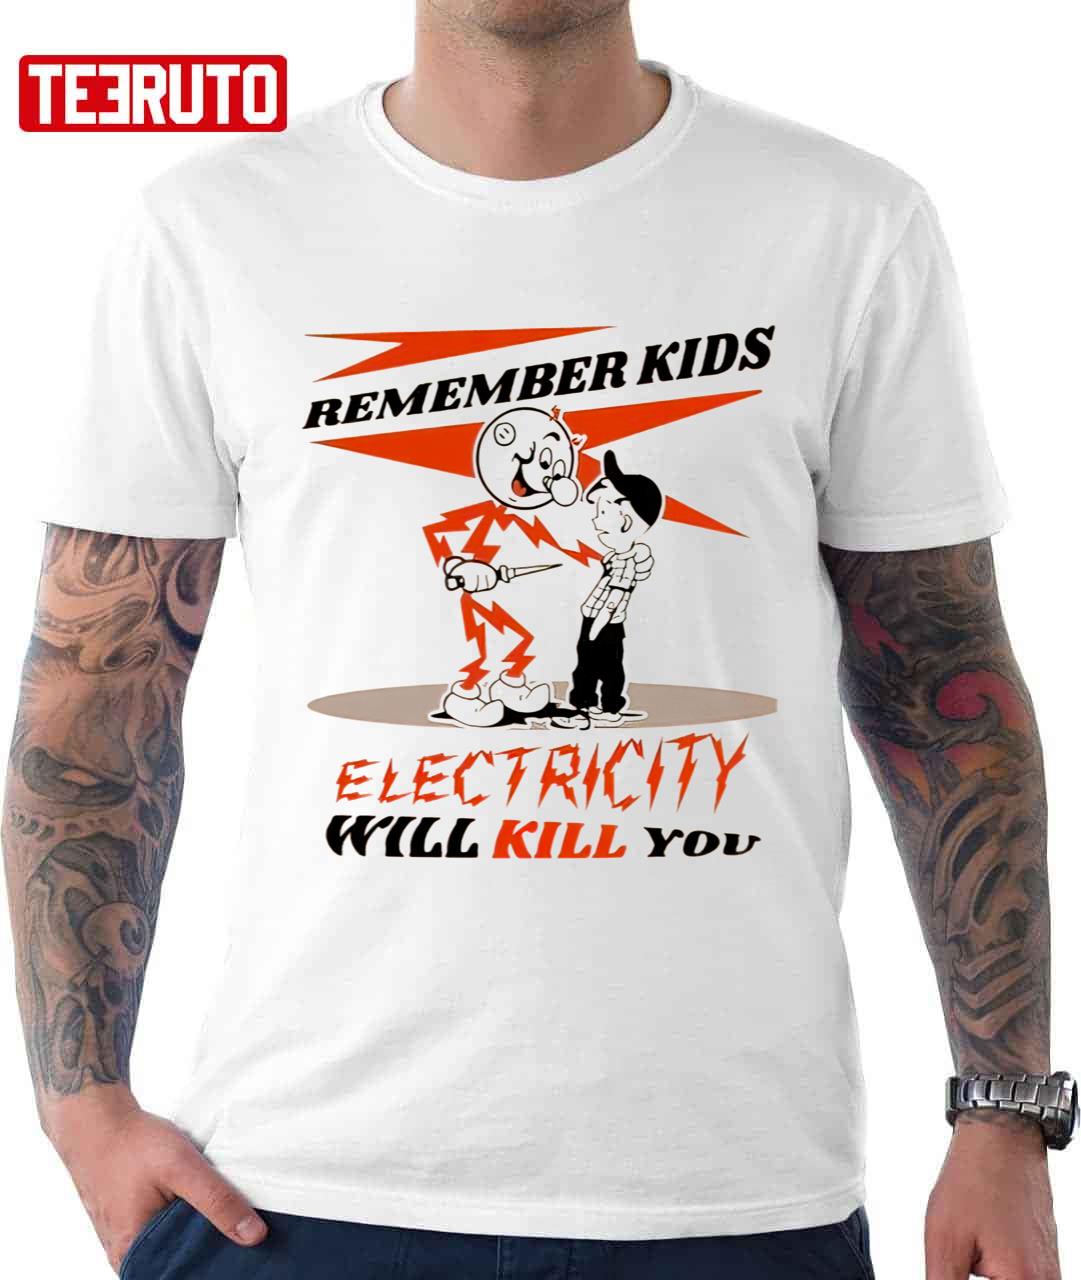 Cips Vintage Electricity Will Kill You Unisex T-Shirt